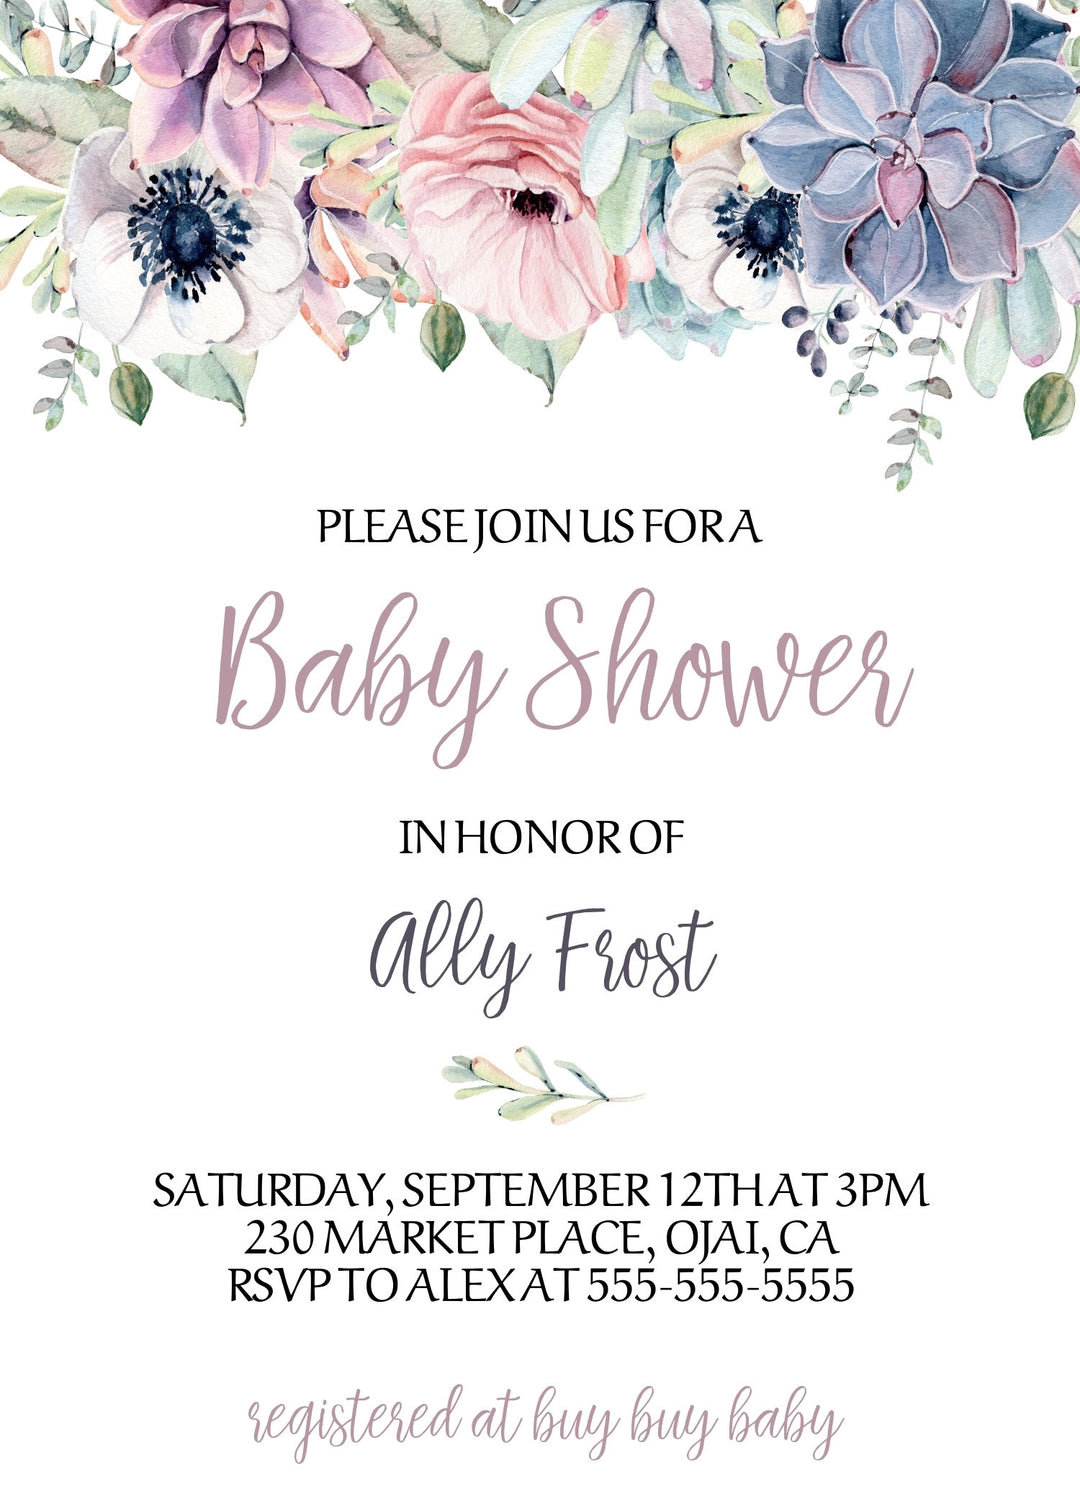 Floral Succulent Baby Shower Invitation - Purple Succulent Baby Shower Invitation - Succulent Books for Baby Card - Girl Baby Shower Invite